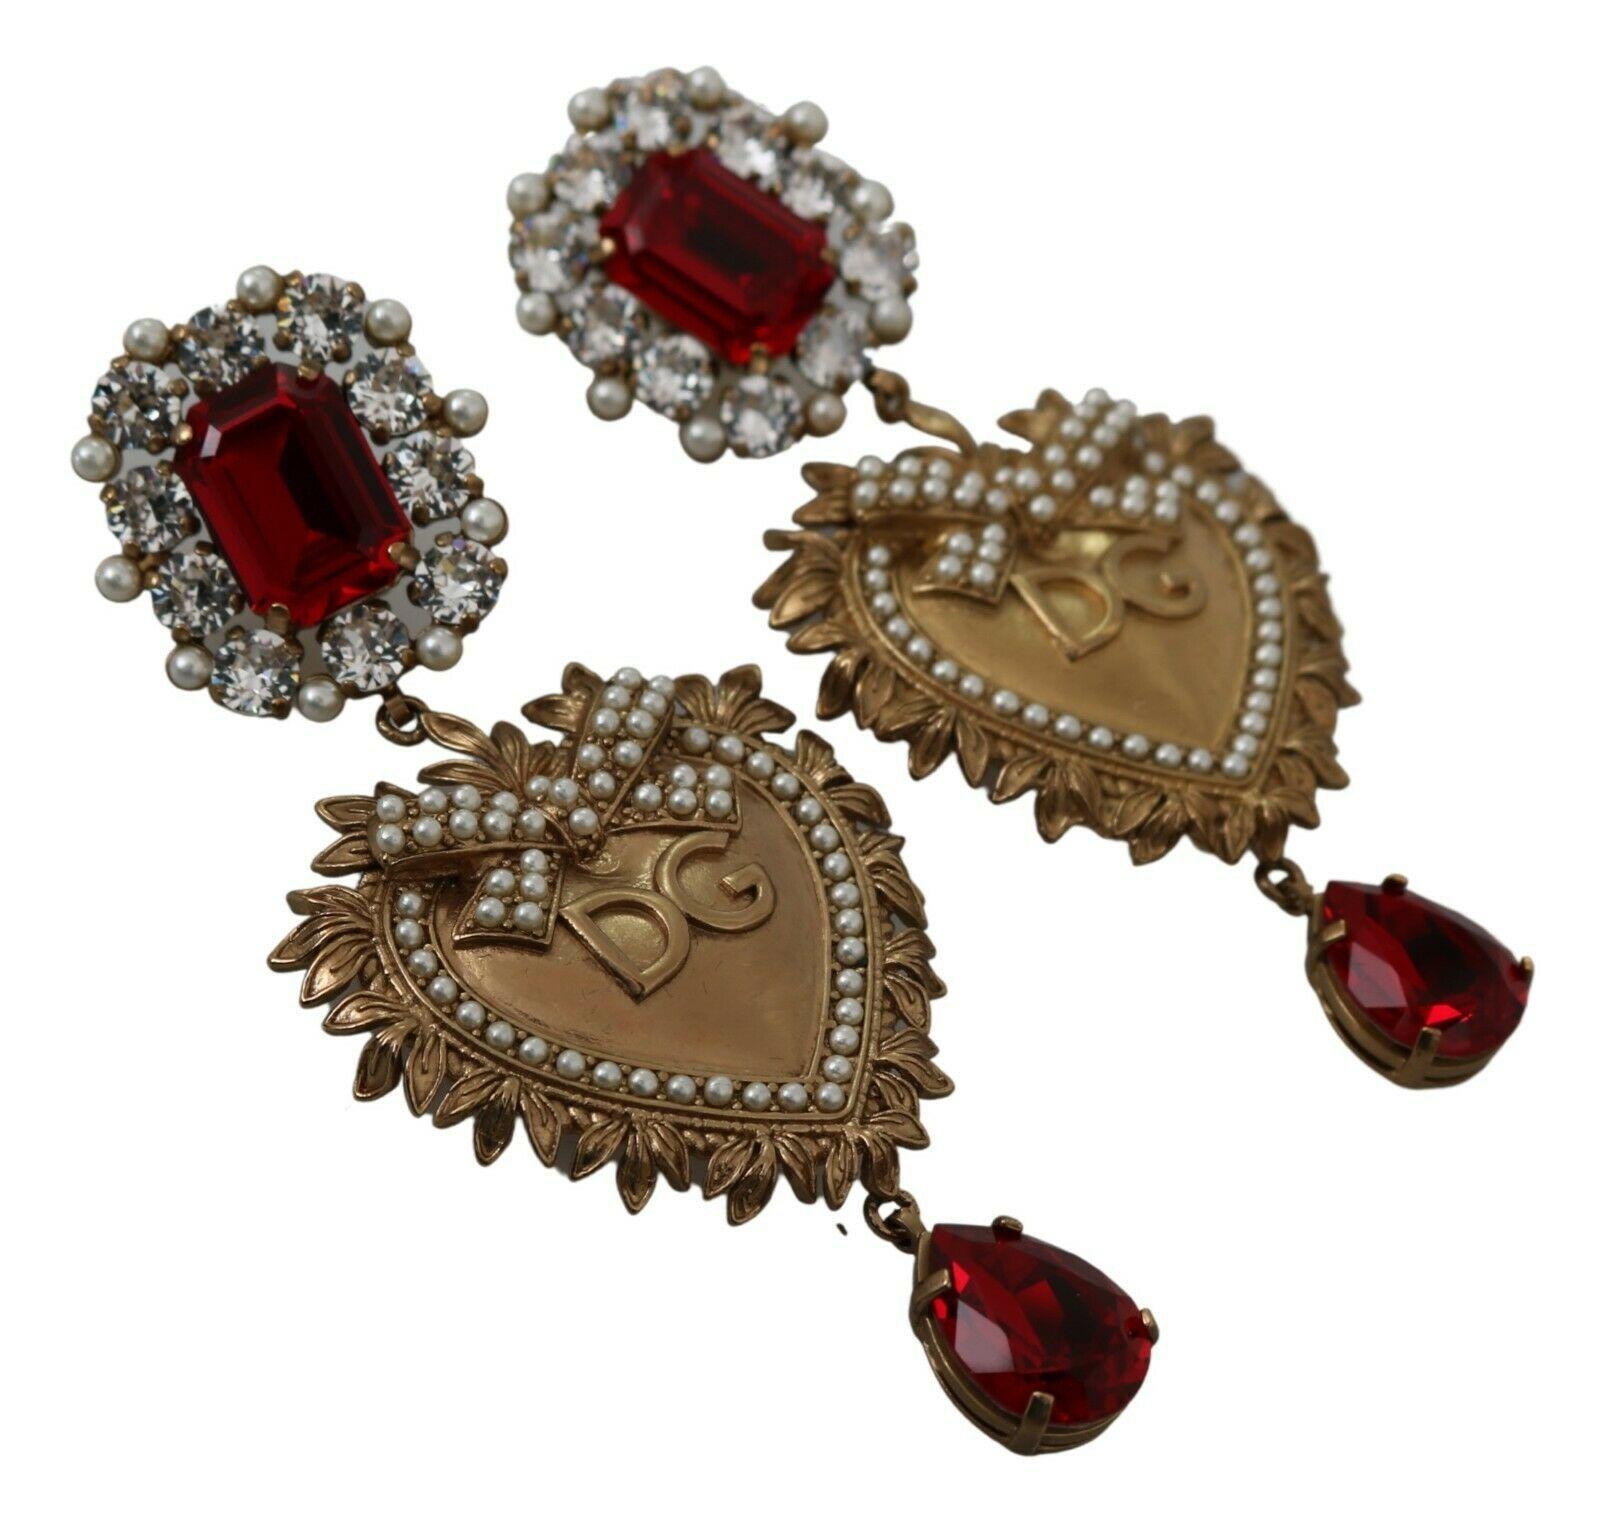 With tags, 100% genuine Dolce & Gabbana earrings.

Pattern: Clip on Dangling
Pattern: Sacred Heart

Material: 80% brass, 20% glass
Color: gold 
Crystals: red and
clear

Logo details

Made in Italy

Length: 10 cm

Dolce & Gabbana Velvet Box, Original